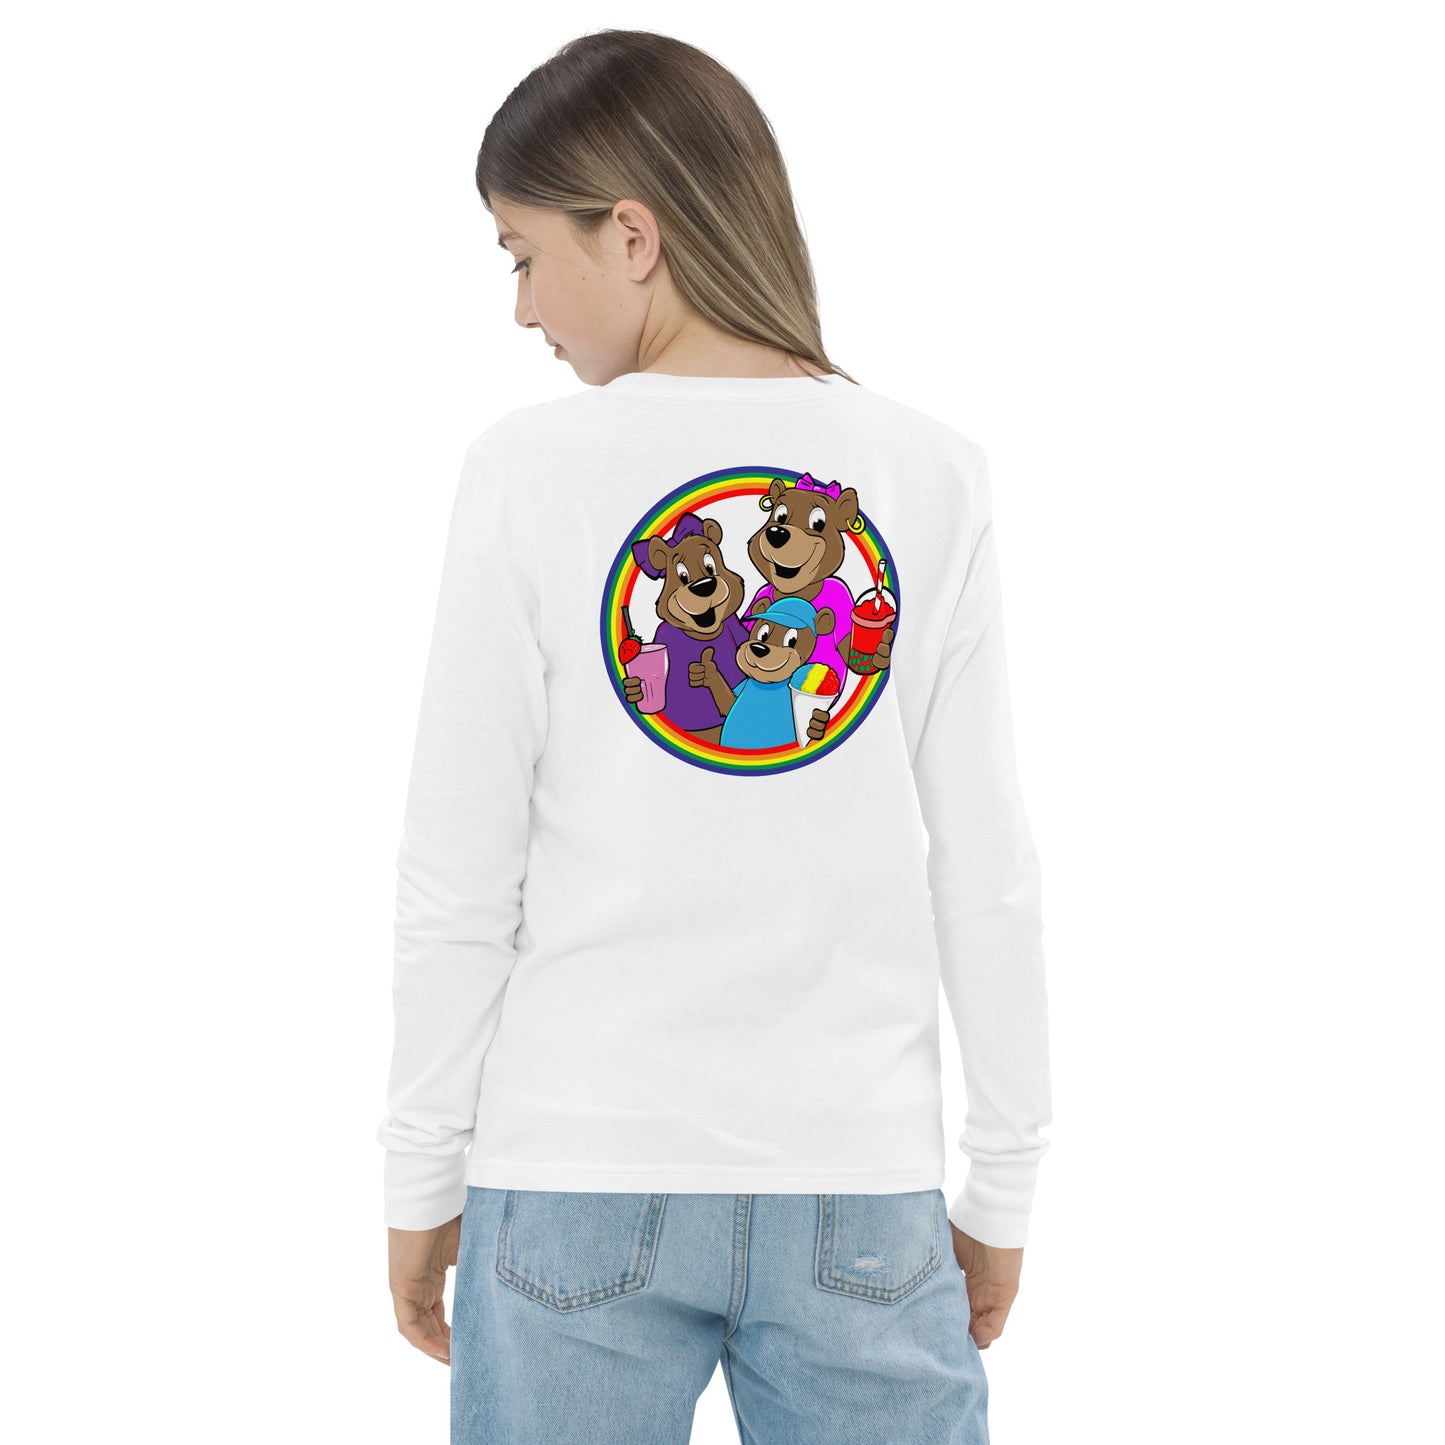 "You Had Me At Boba" BesTEAS Youth Long Sleeve Tee